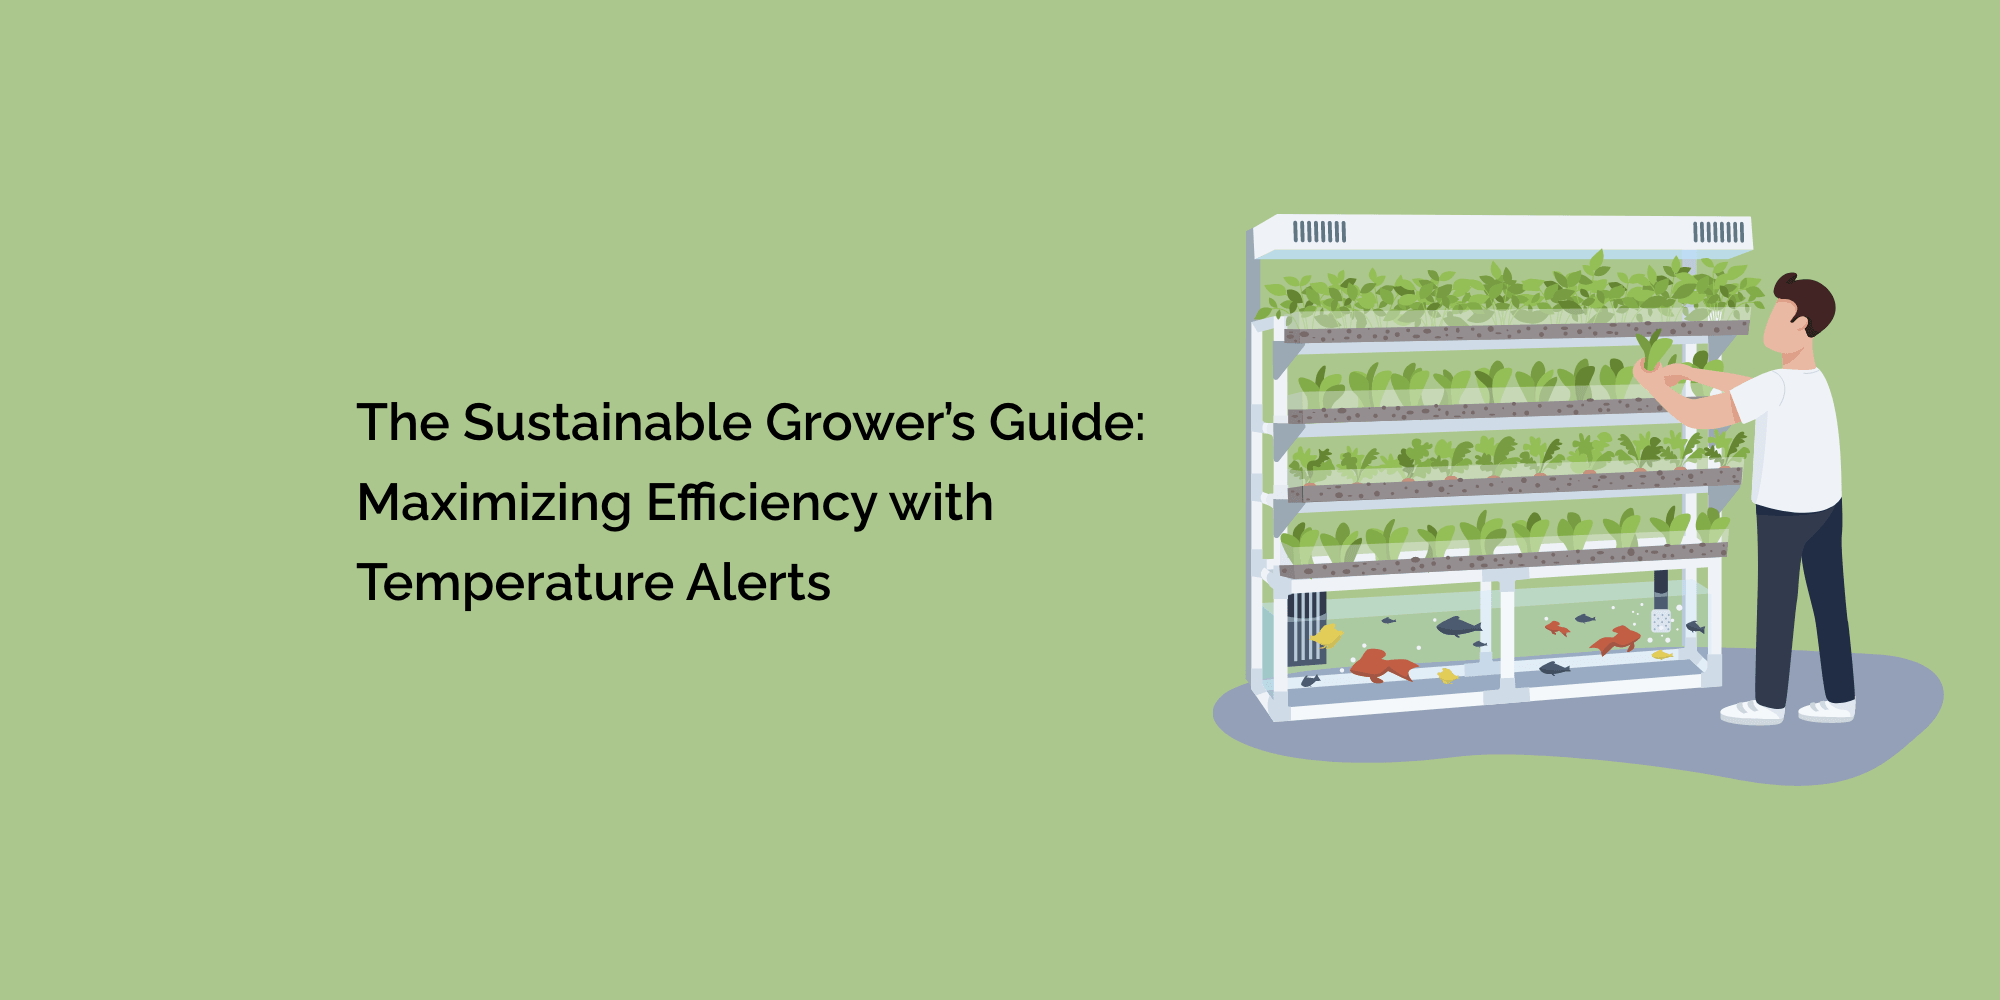 The Sustainable Grower's Guide: Maximizing Efficiency with Temperature Alerts